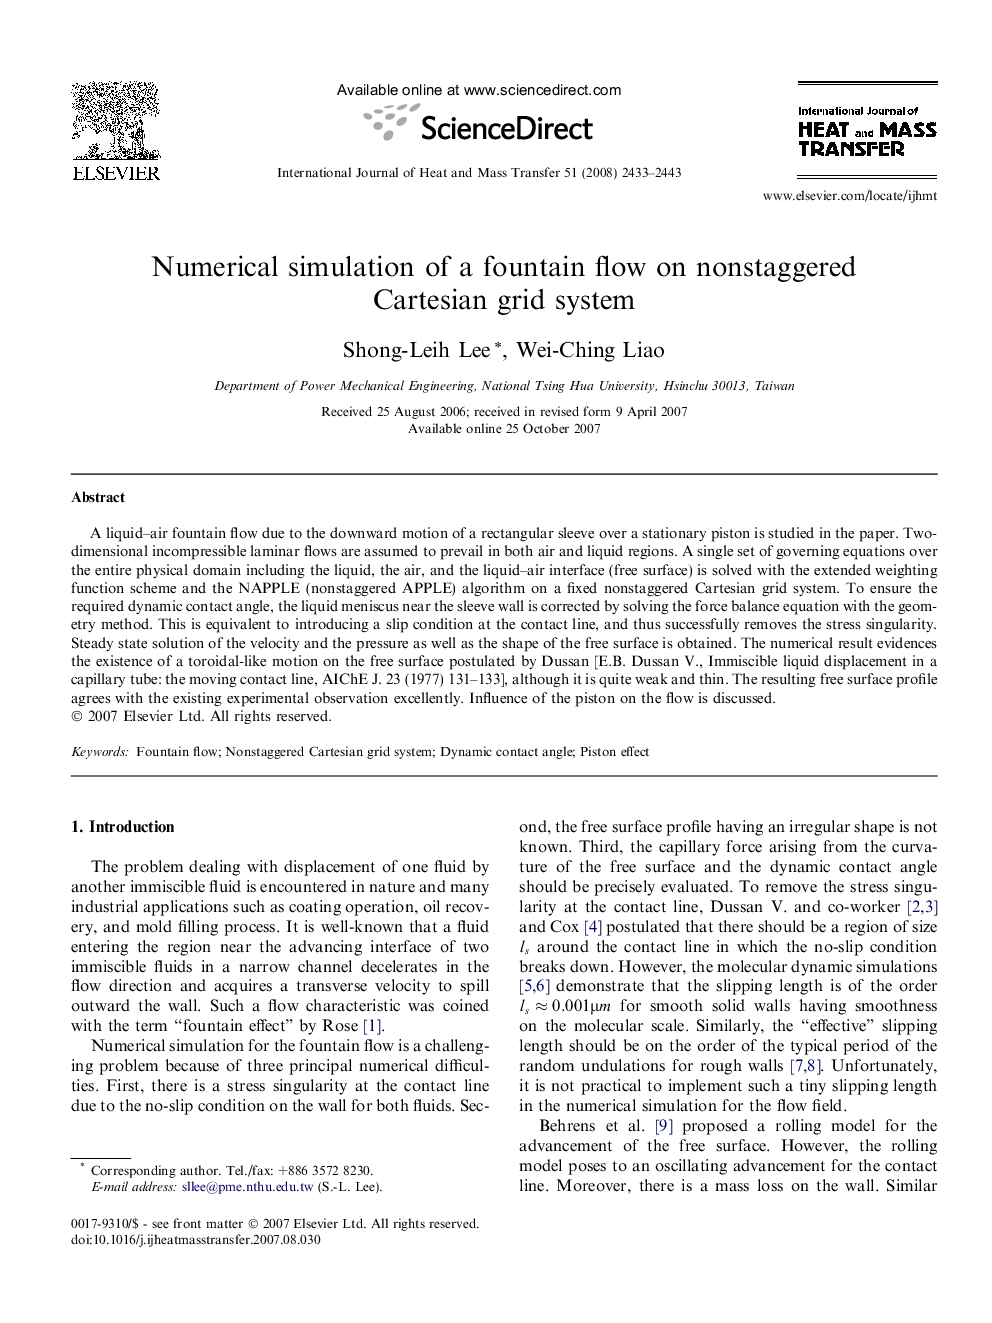 Numerical simulation of a fountain flow on nonstaggered Cartesian grid system